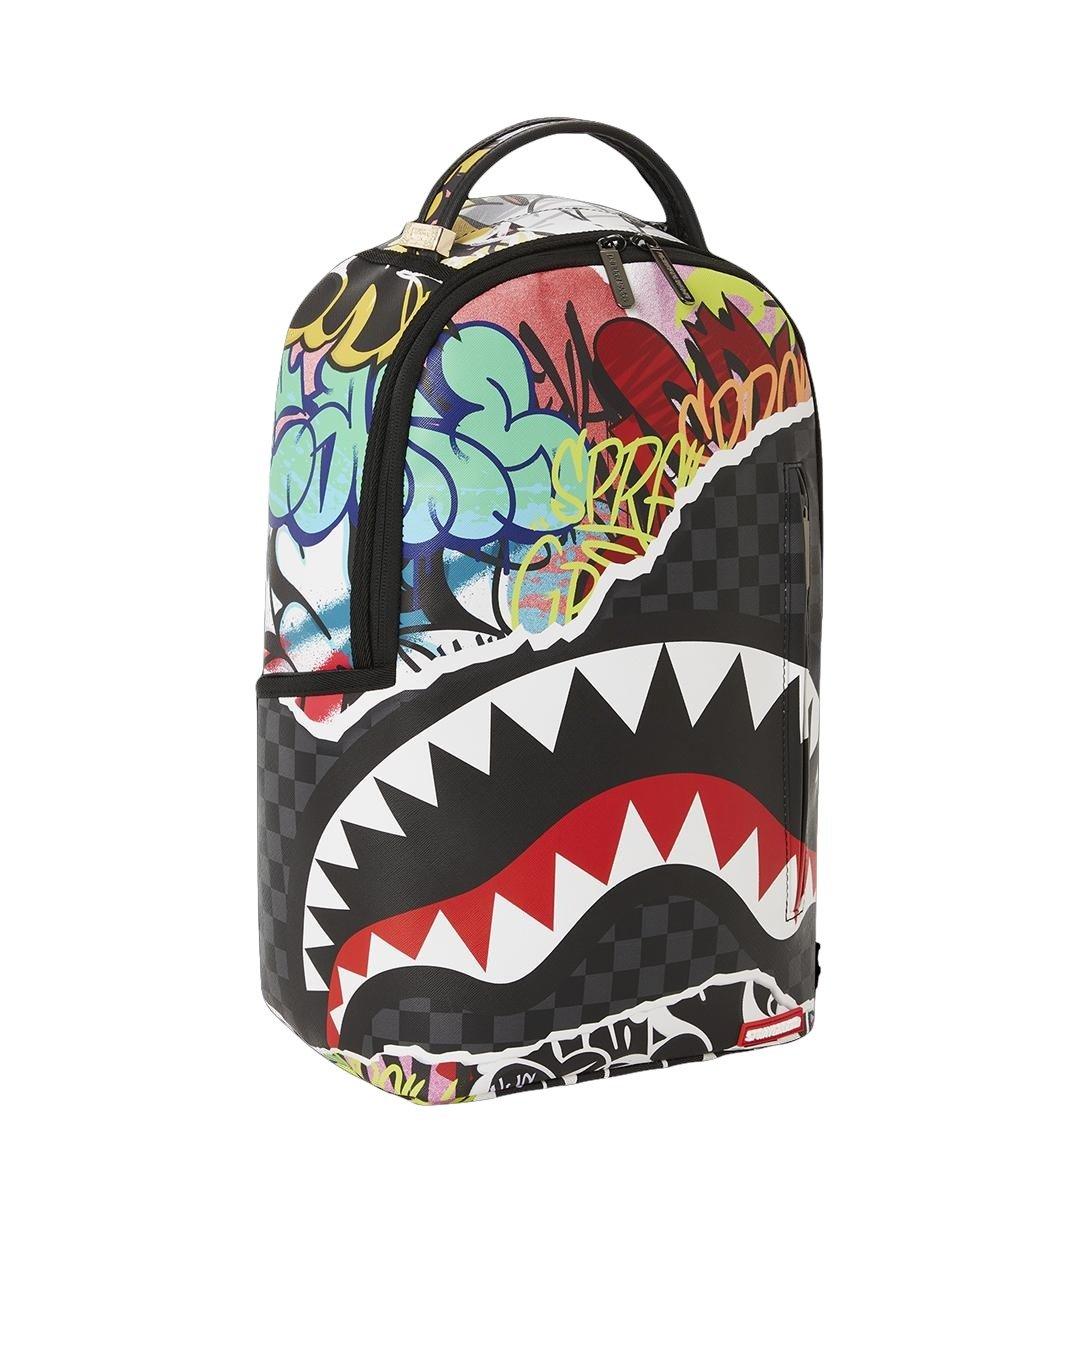 Hibbett on X: Grab a pack by @Sprayground and lets go